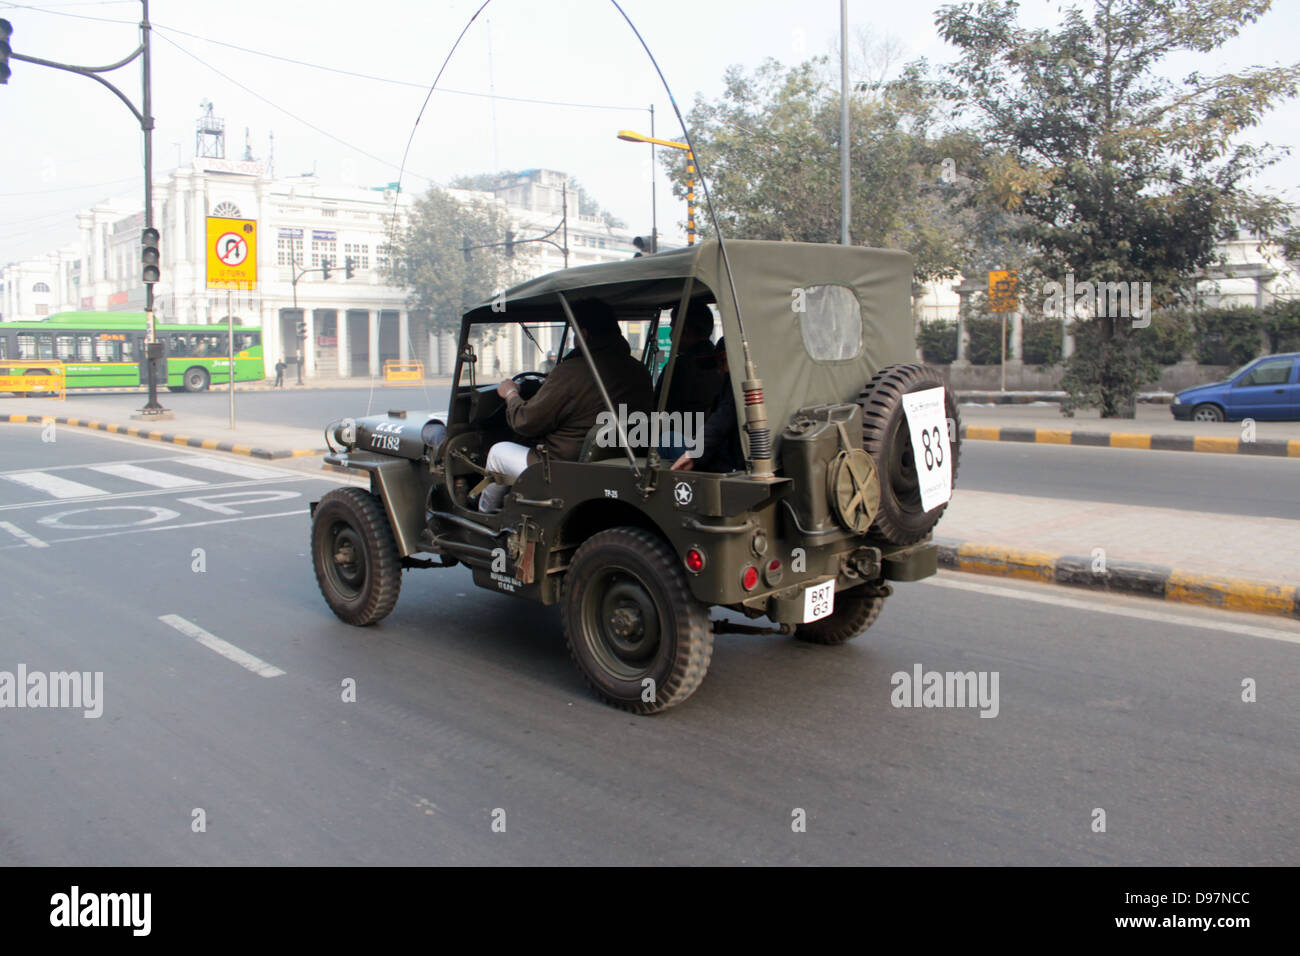 The 2012 Statesman Vintage and Classic Car rally in New Delhi had a number of military jeeps and trucks. Stock Photo